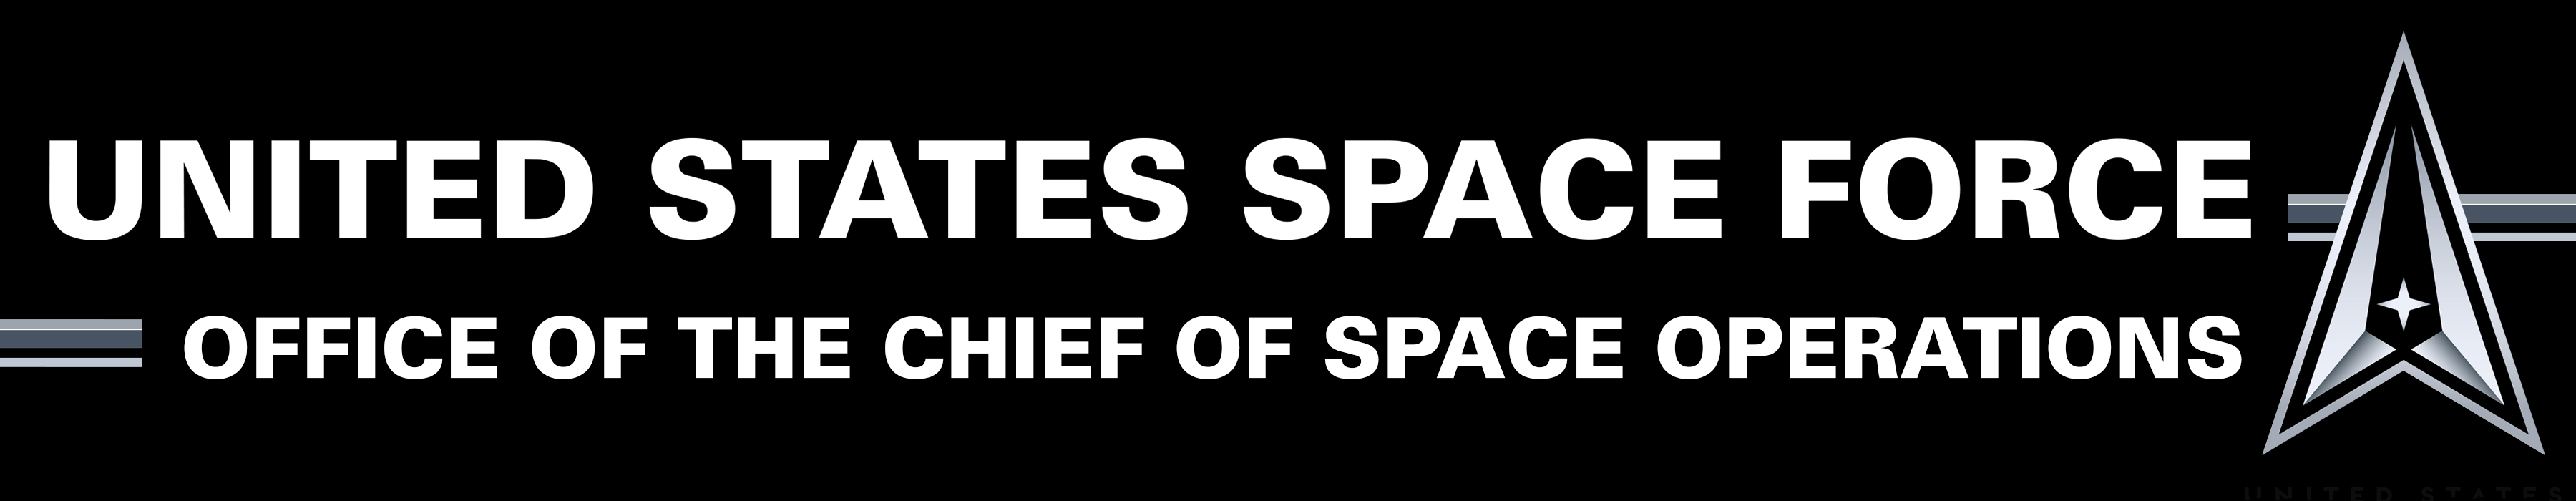 Office of the Chief of Space Operations graphic